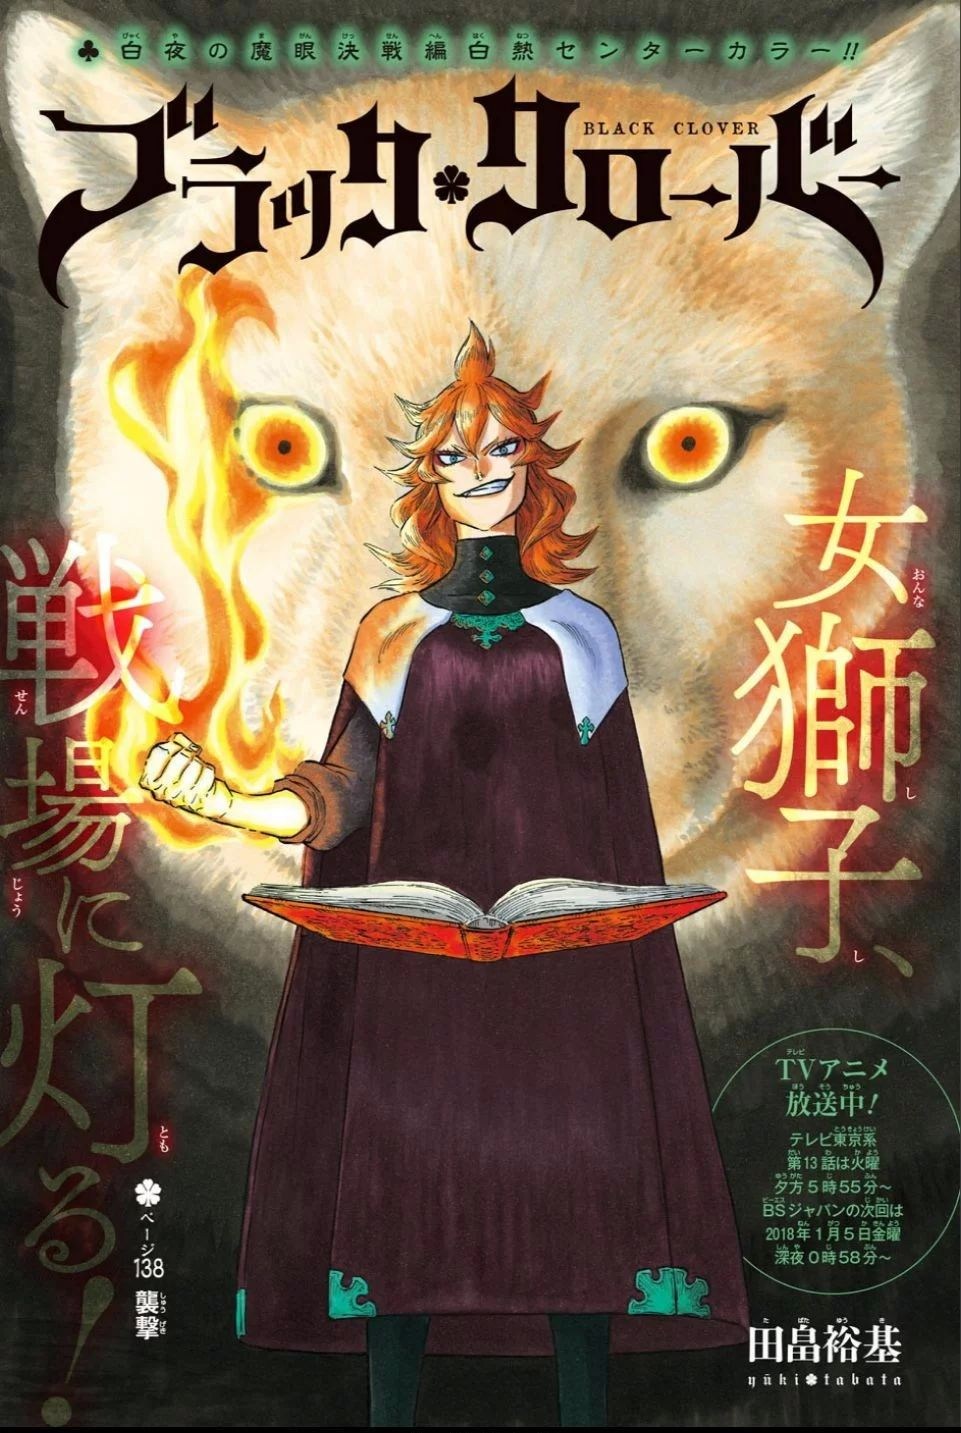 Black Clover - Chapter 138 - Page 1